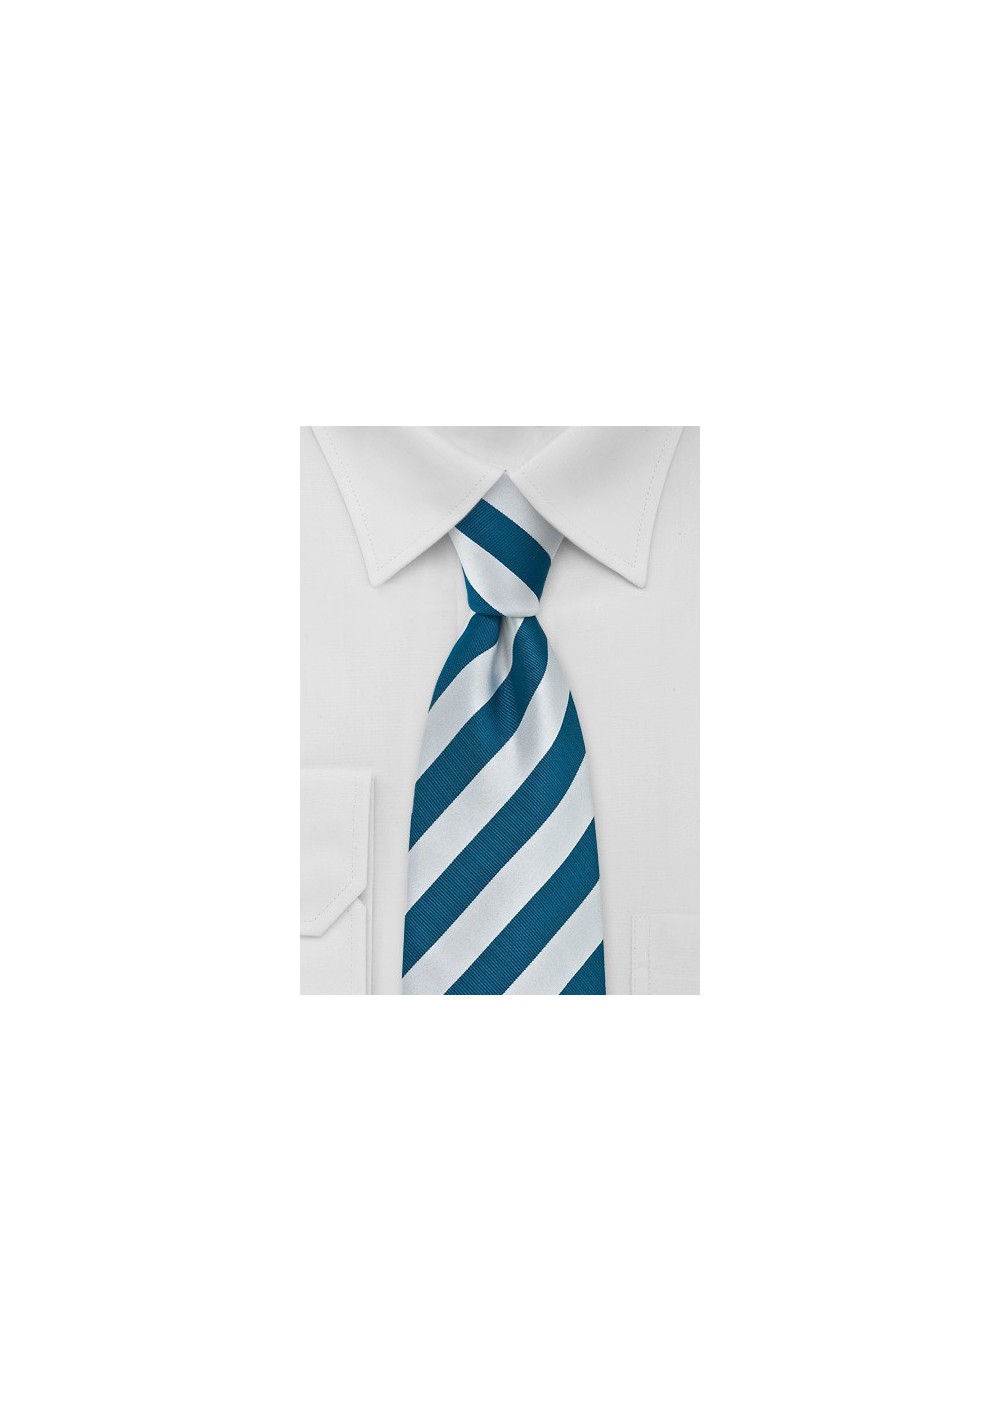 Teal and Silver Striped Necktie